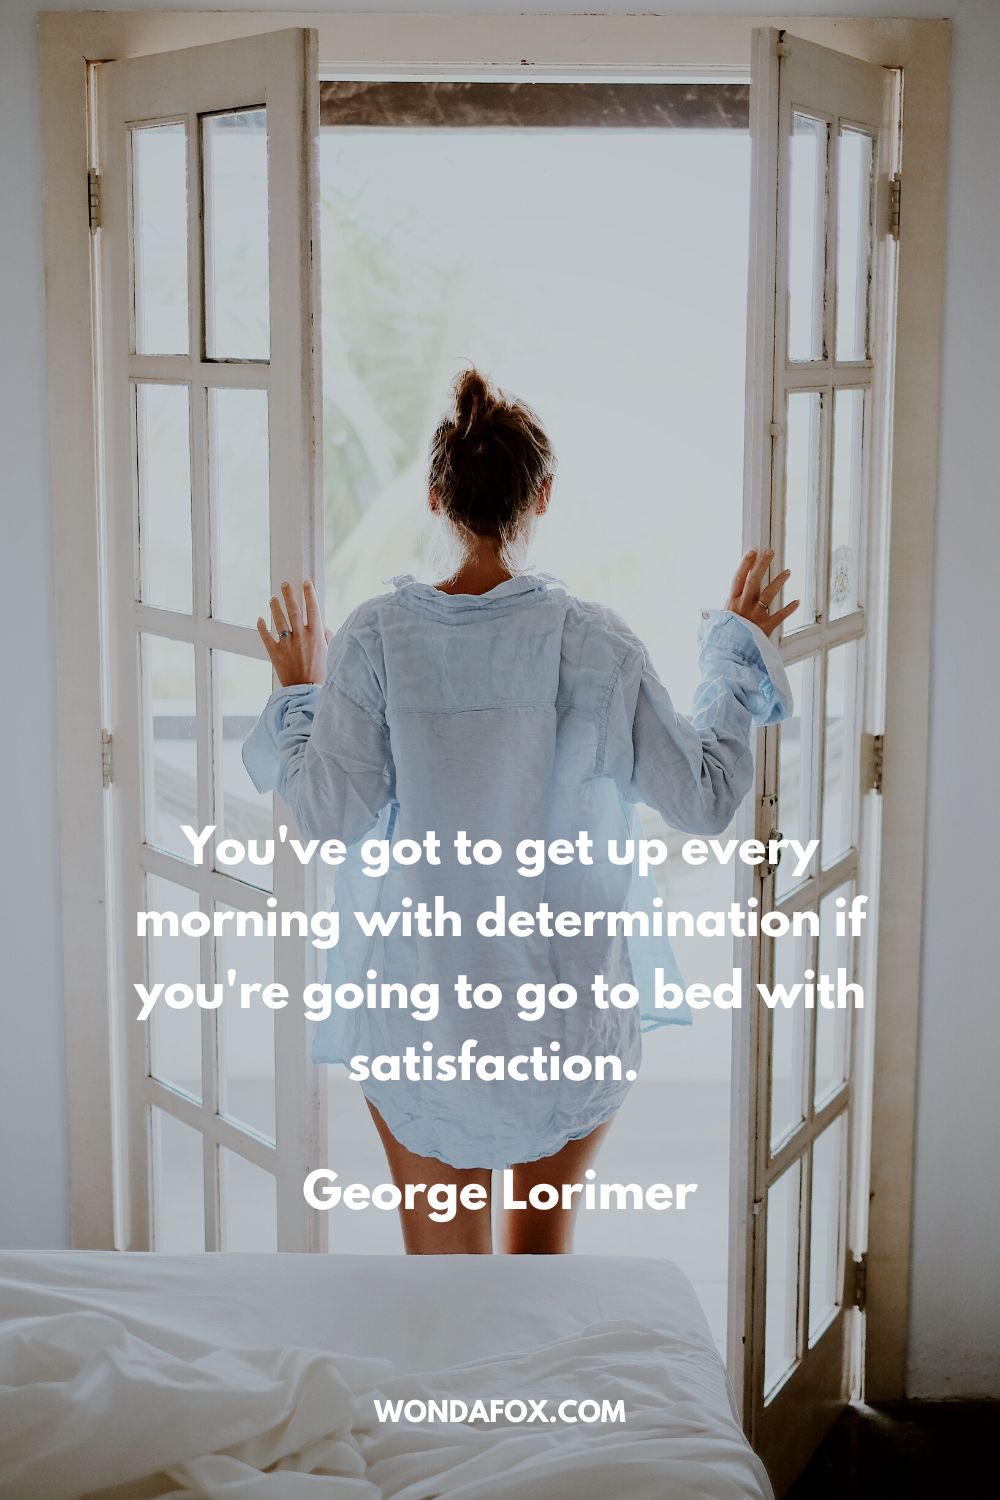 “You've got to get up every morning with determination if you're going to go to bed with satisfaction. George Lorimer